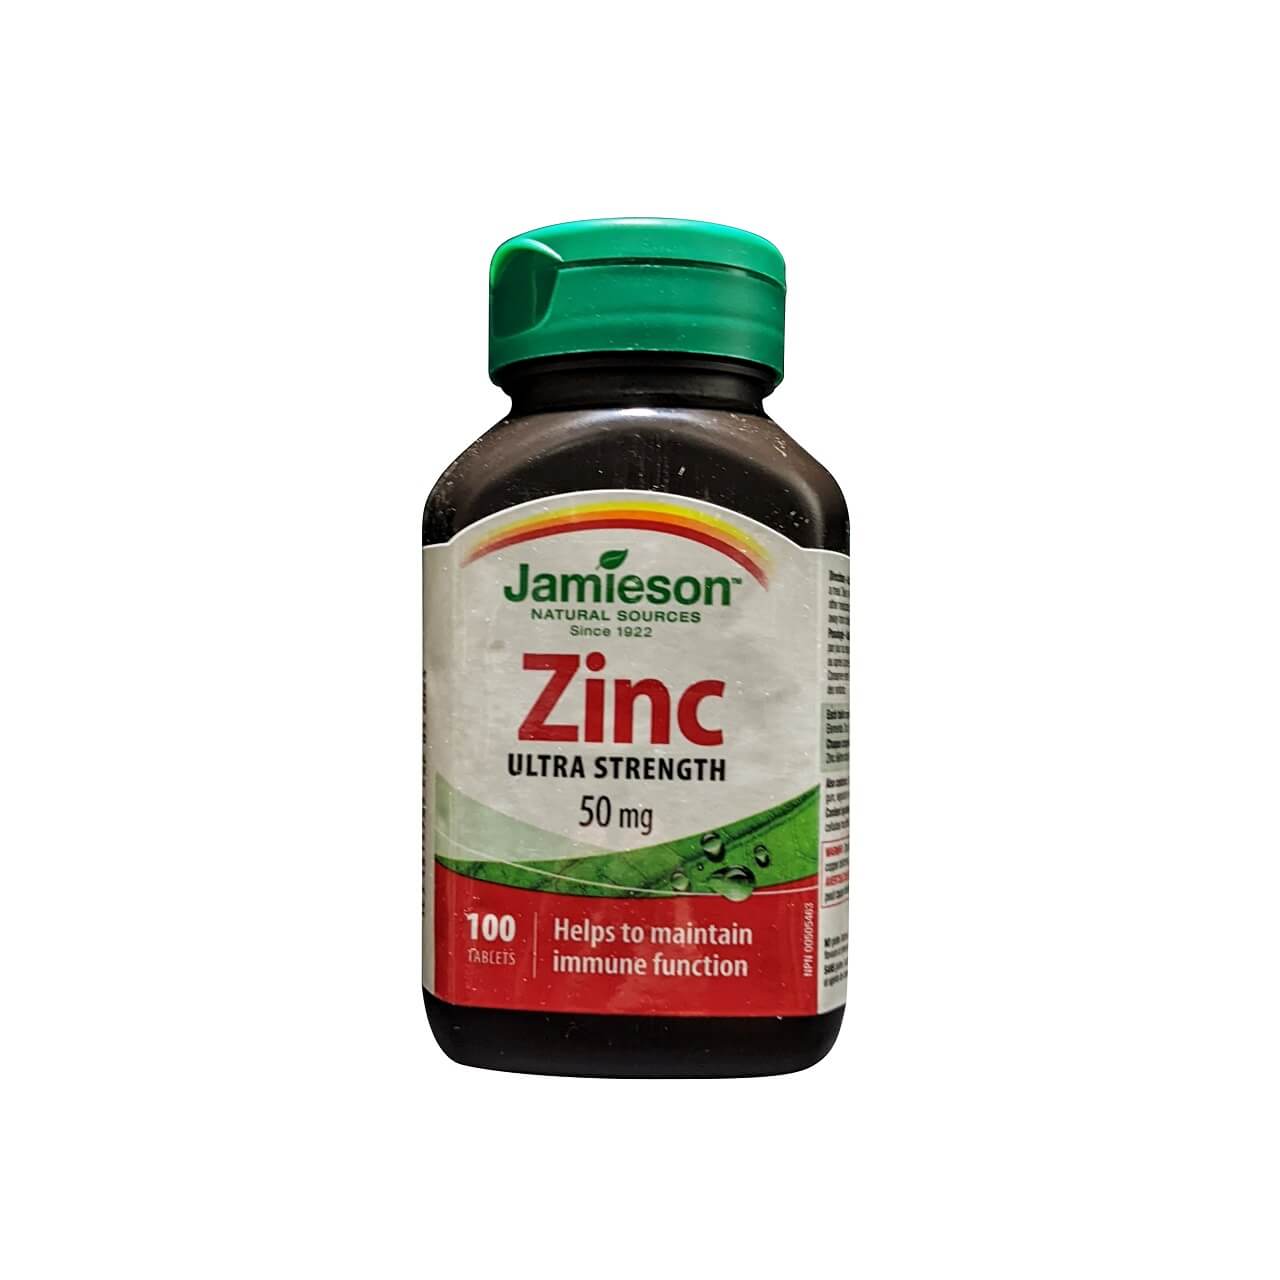 Product label for Jamieson Zinc 50 mg Ultra Strength (100 tablets) in English